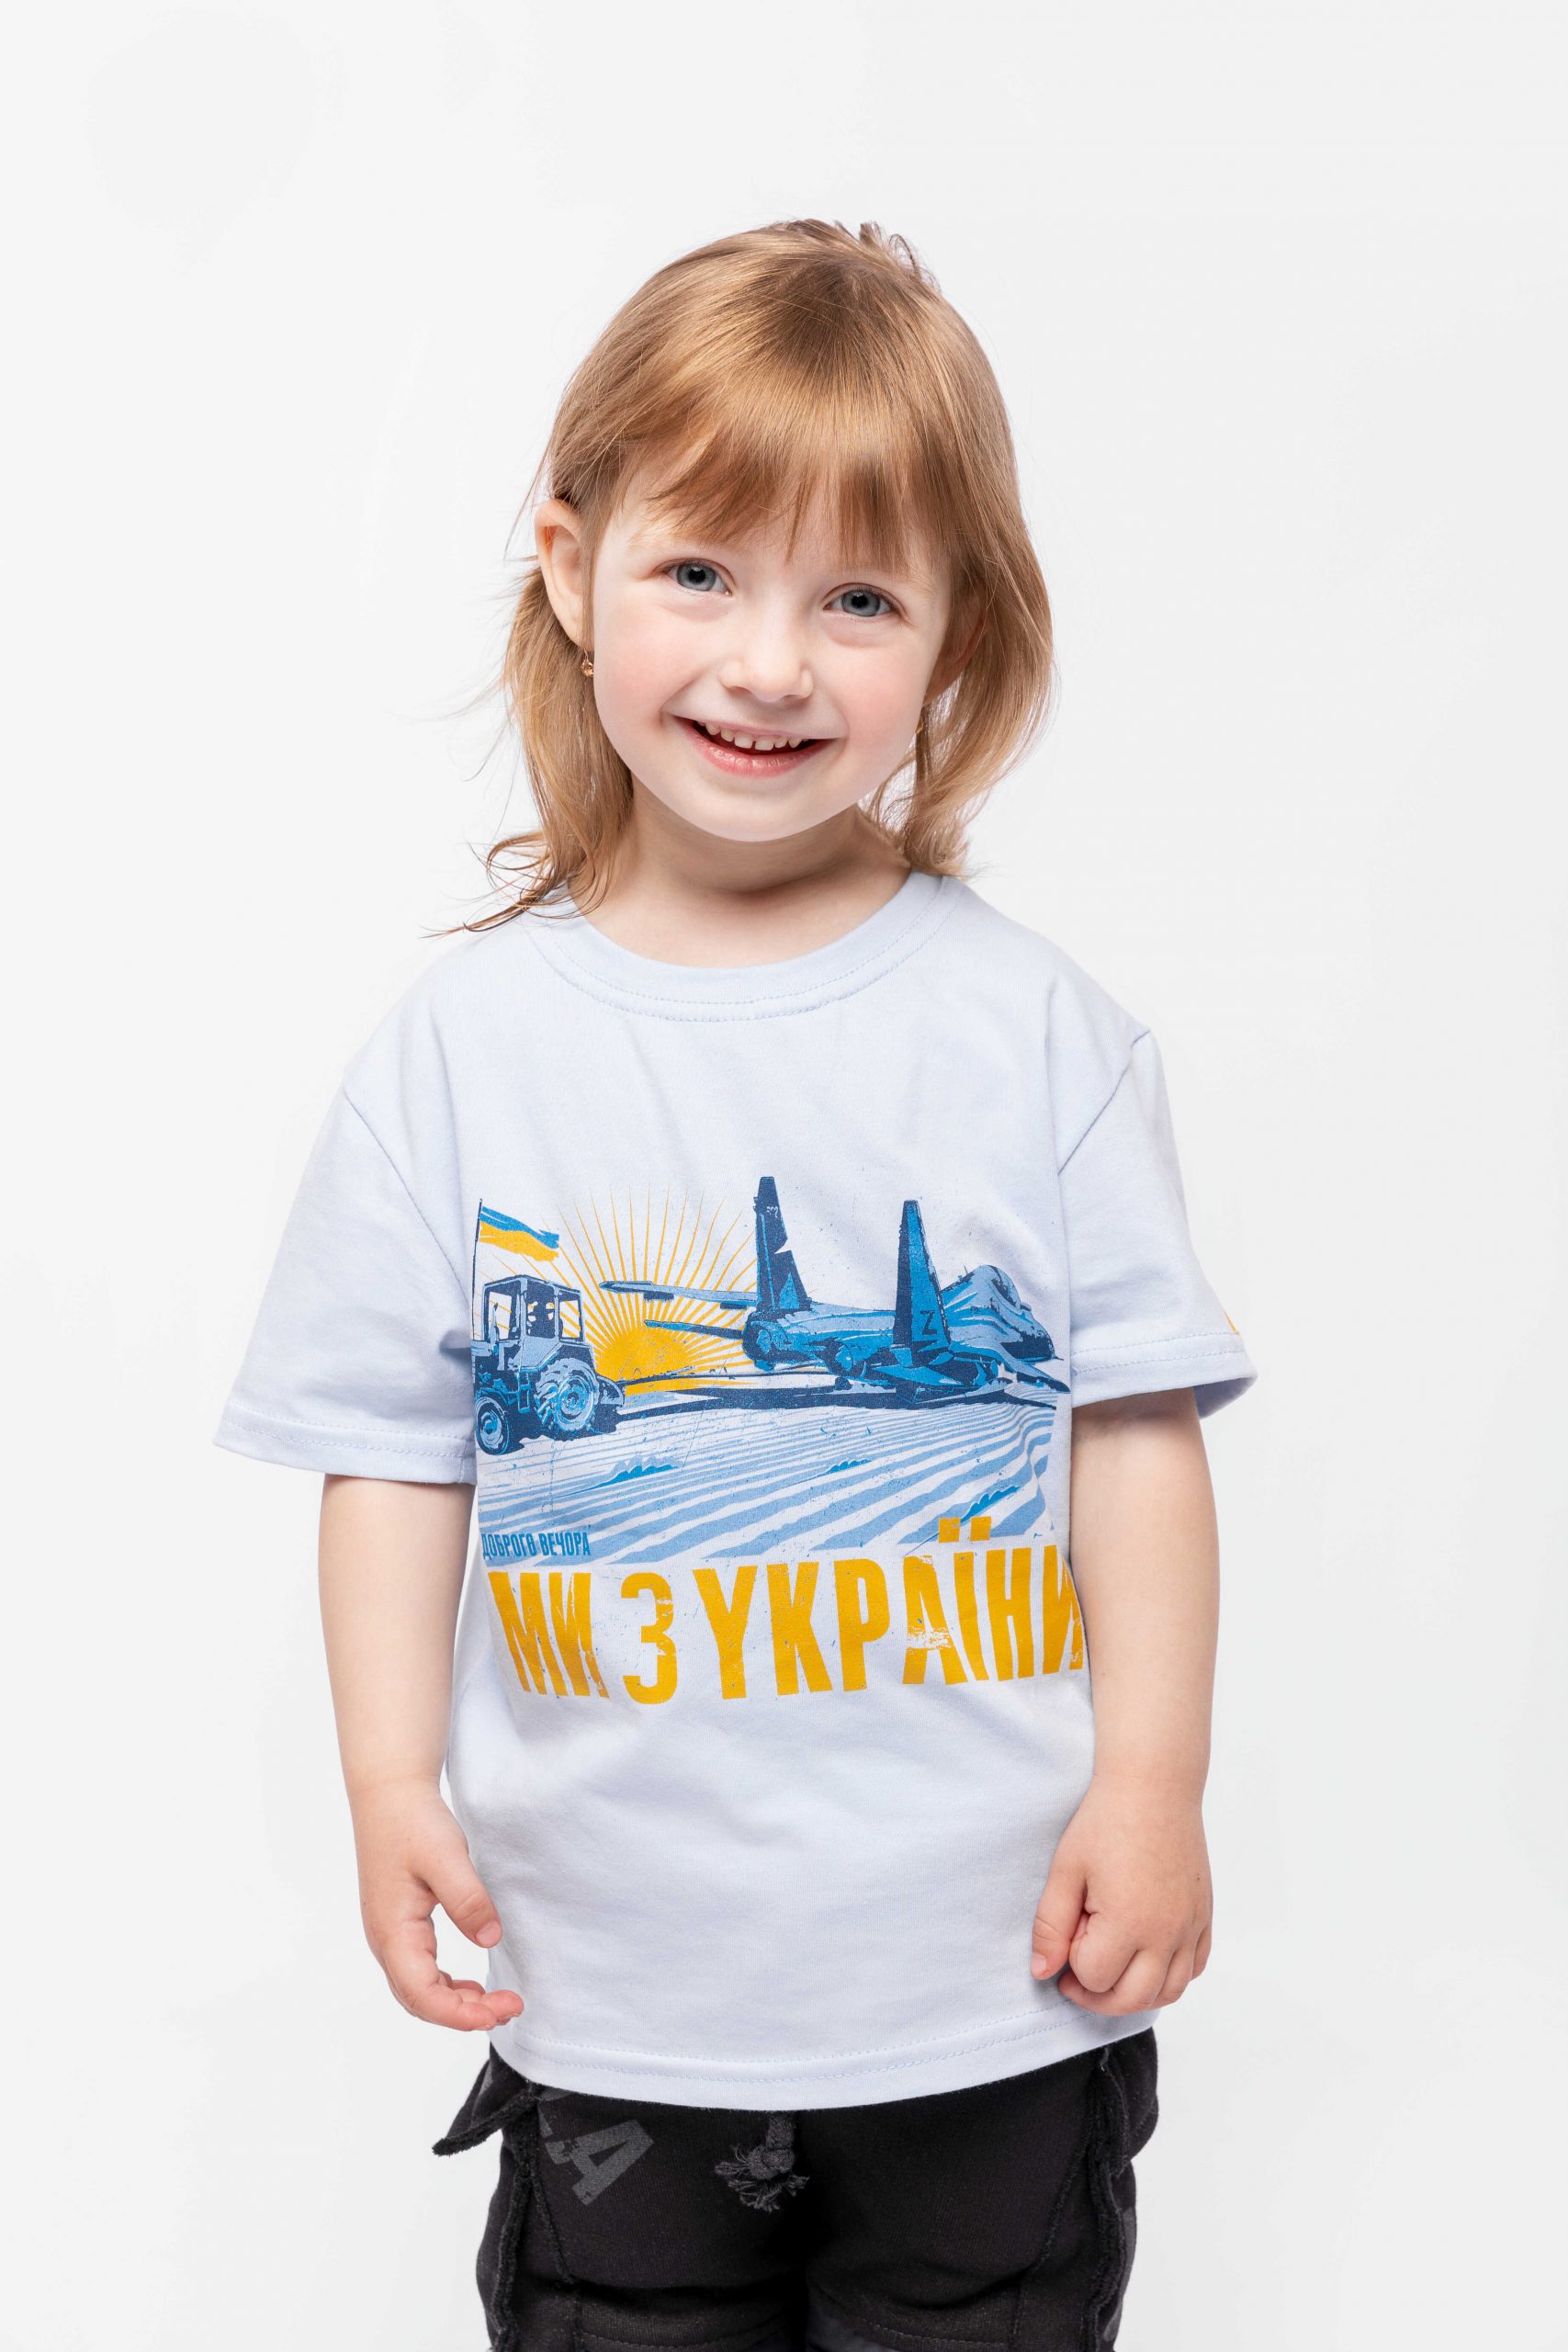 Kids T-Shirt We Are From Ukraine.a. Color light blue. .